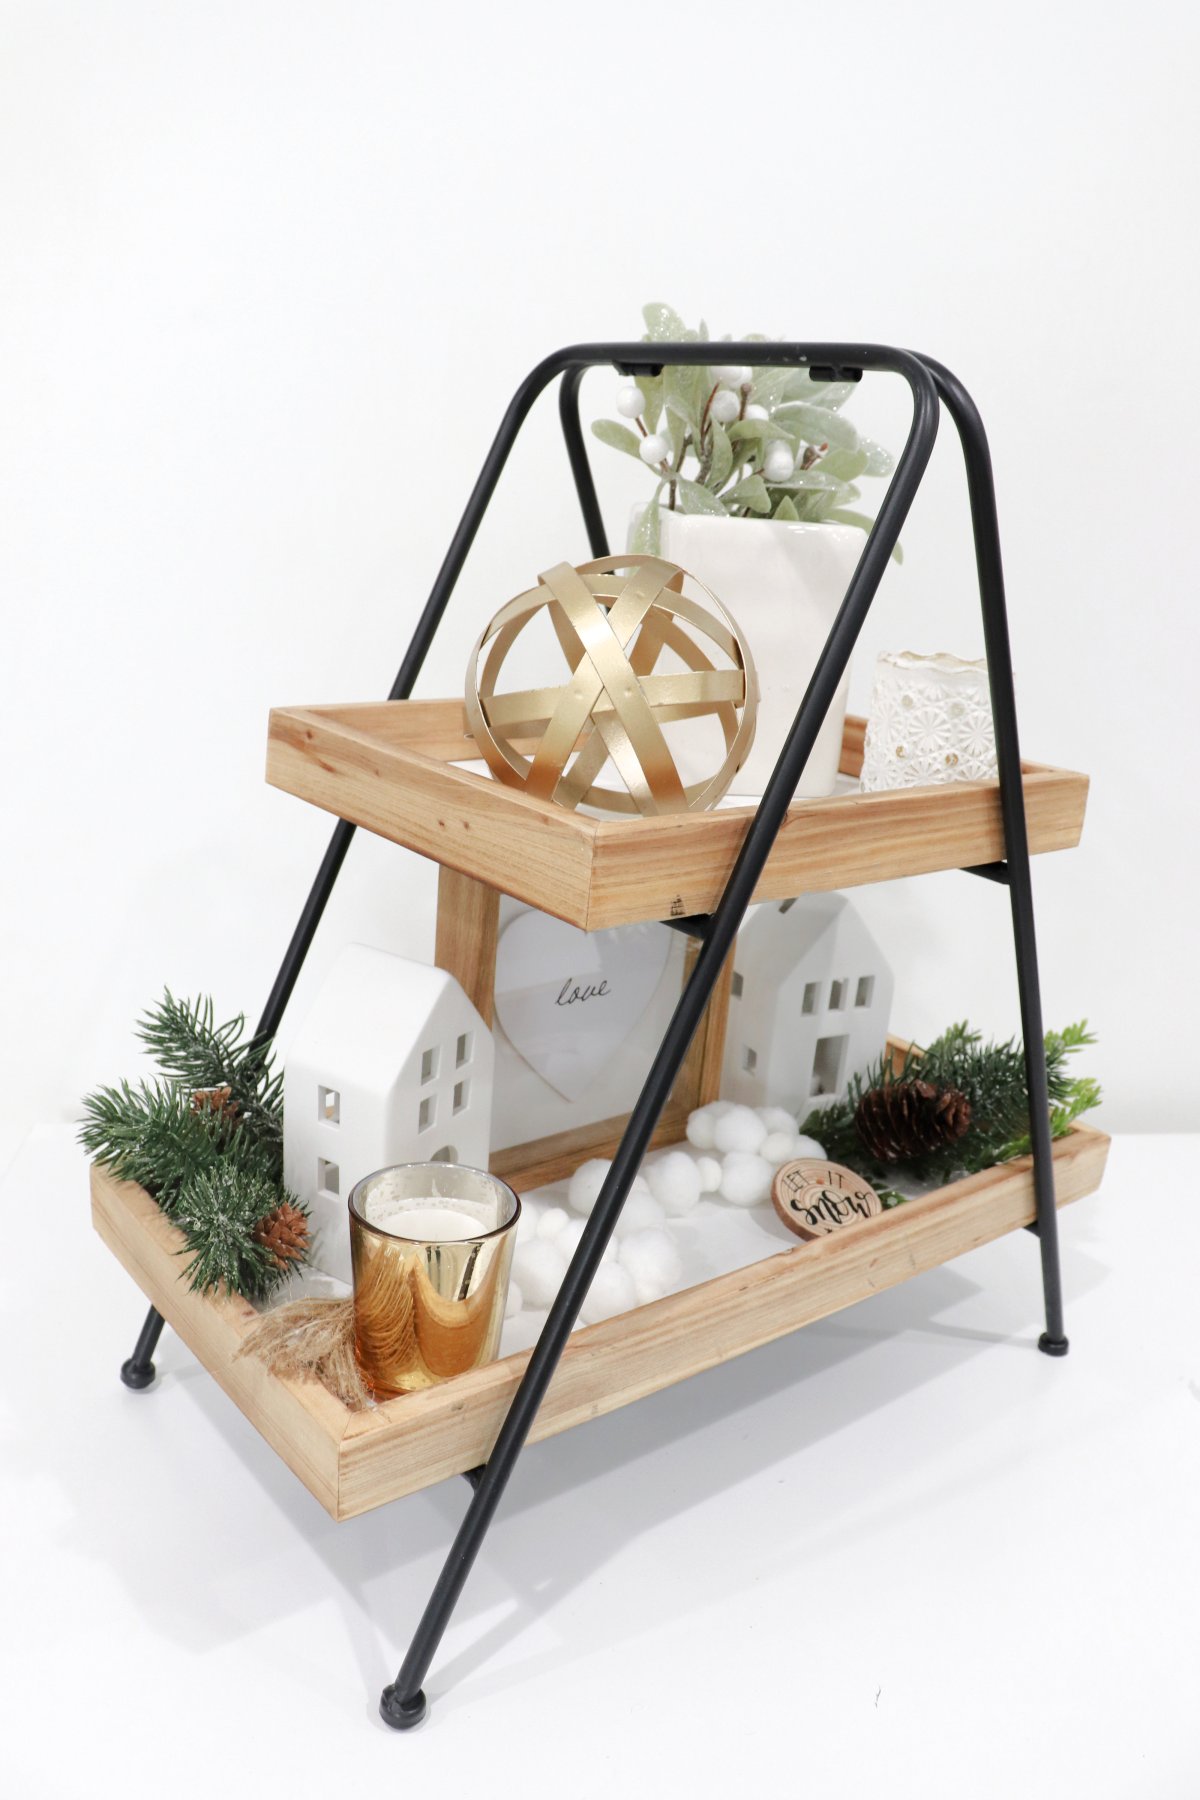 Image contains a decorative two-tiered tray styled for winter with white, green, and gold accents.